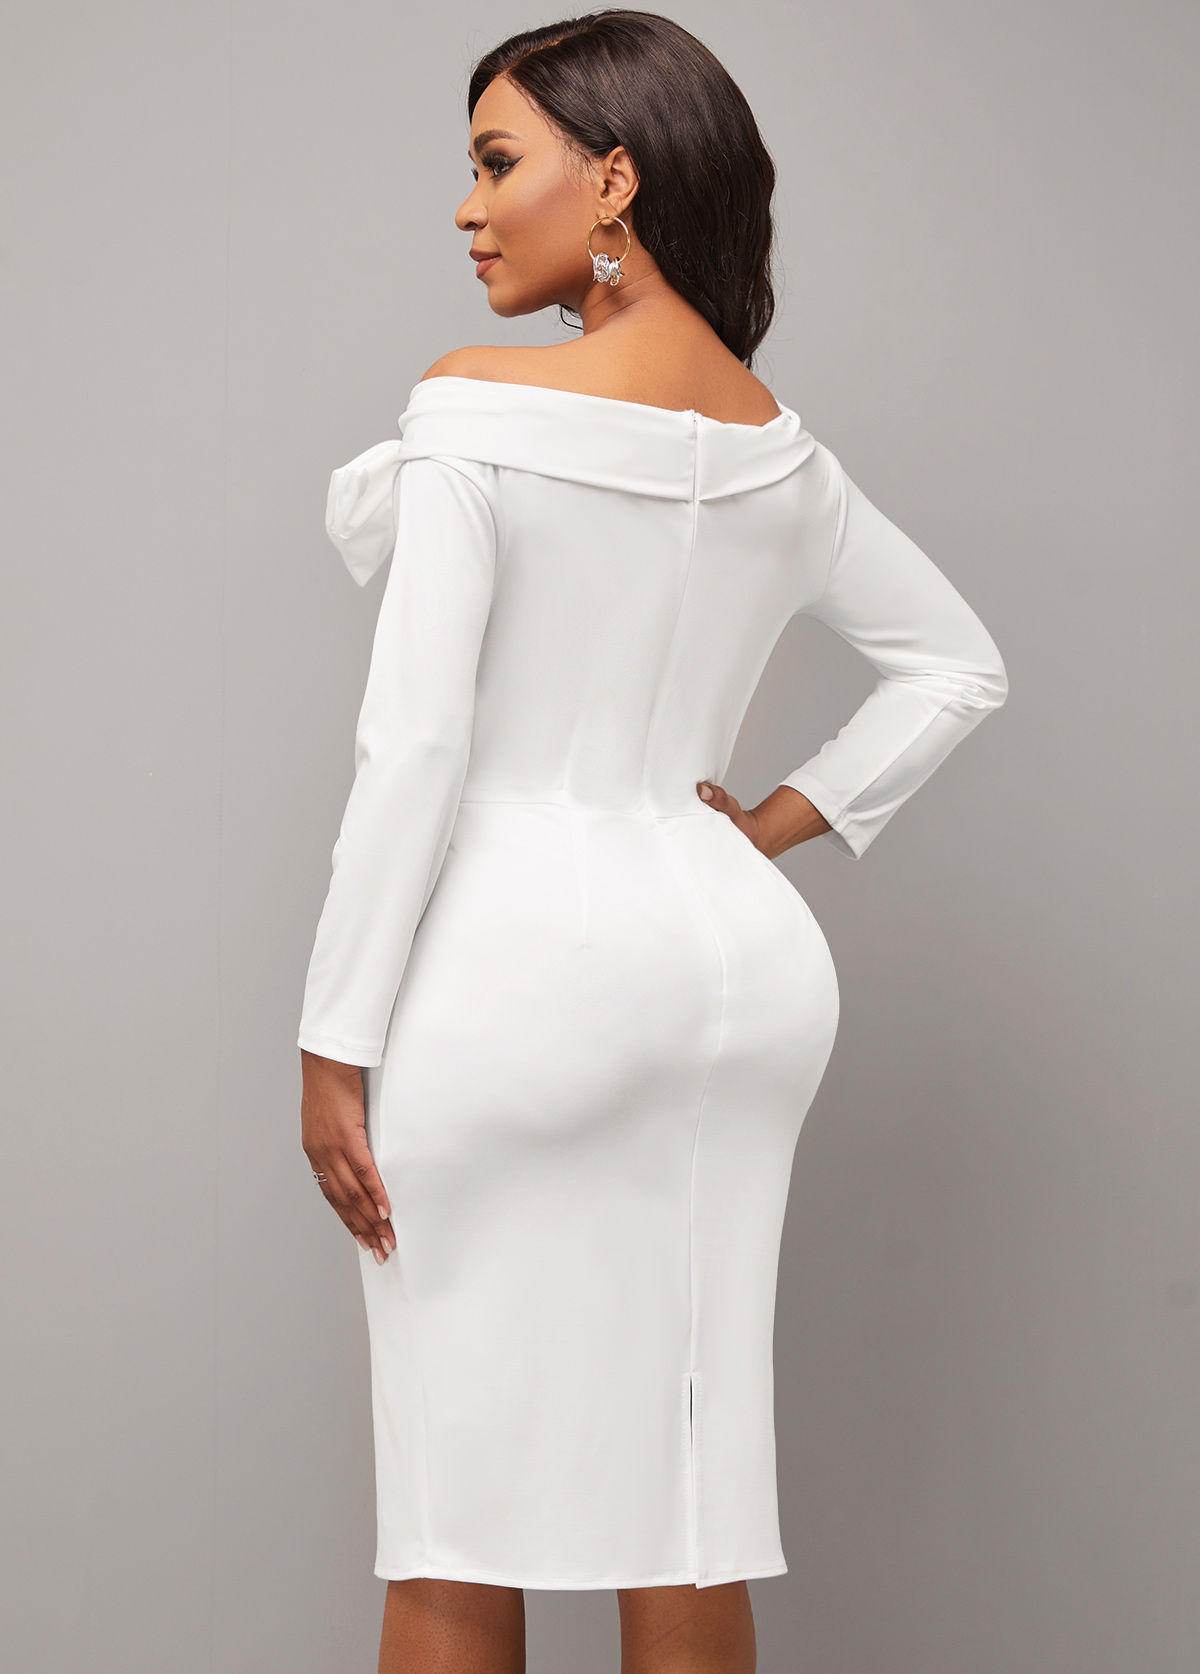 White Off Shoulder Bowknot Bodycon Dress